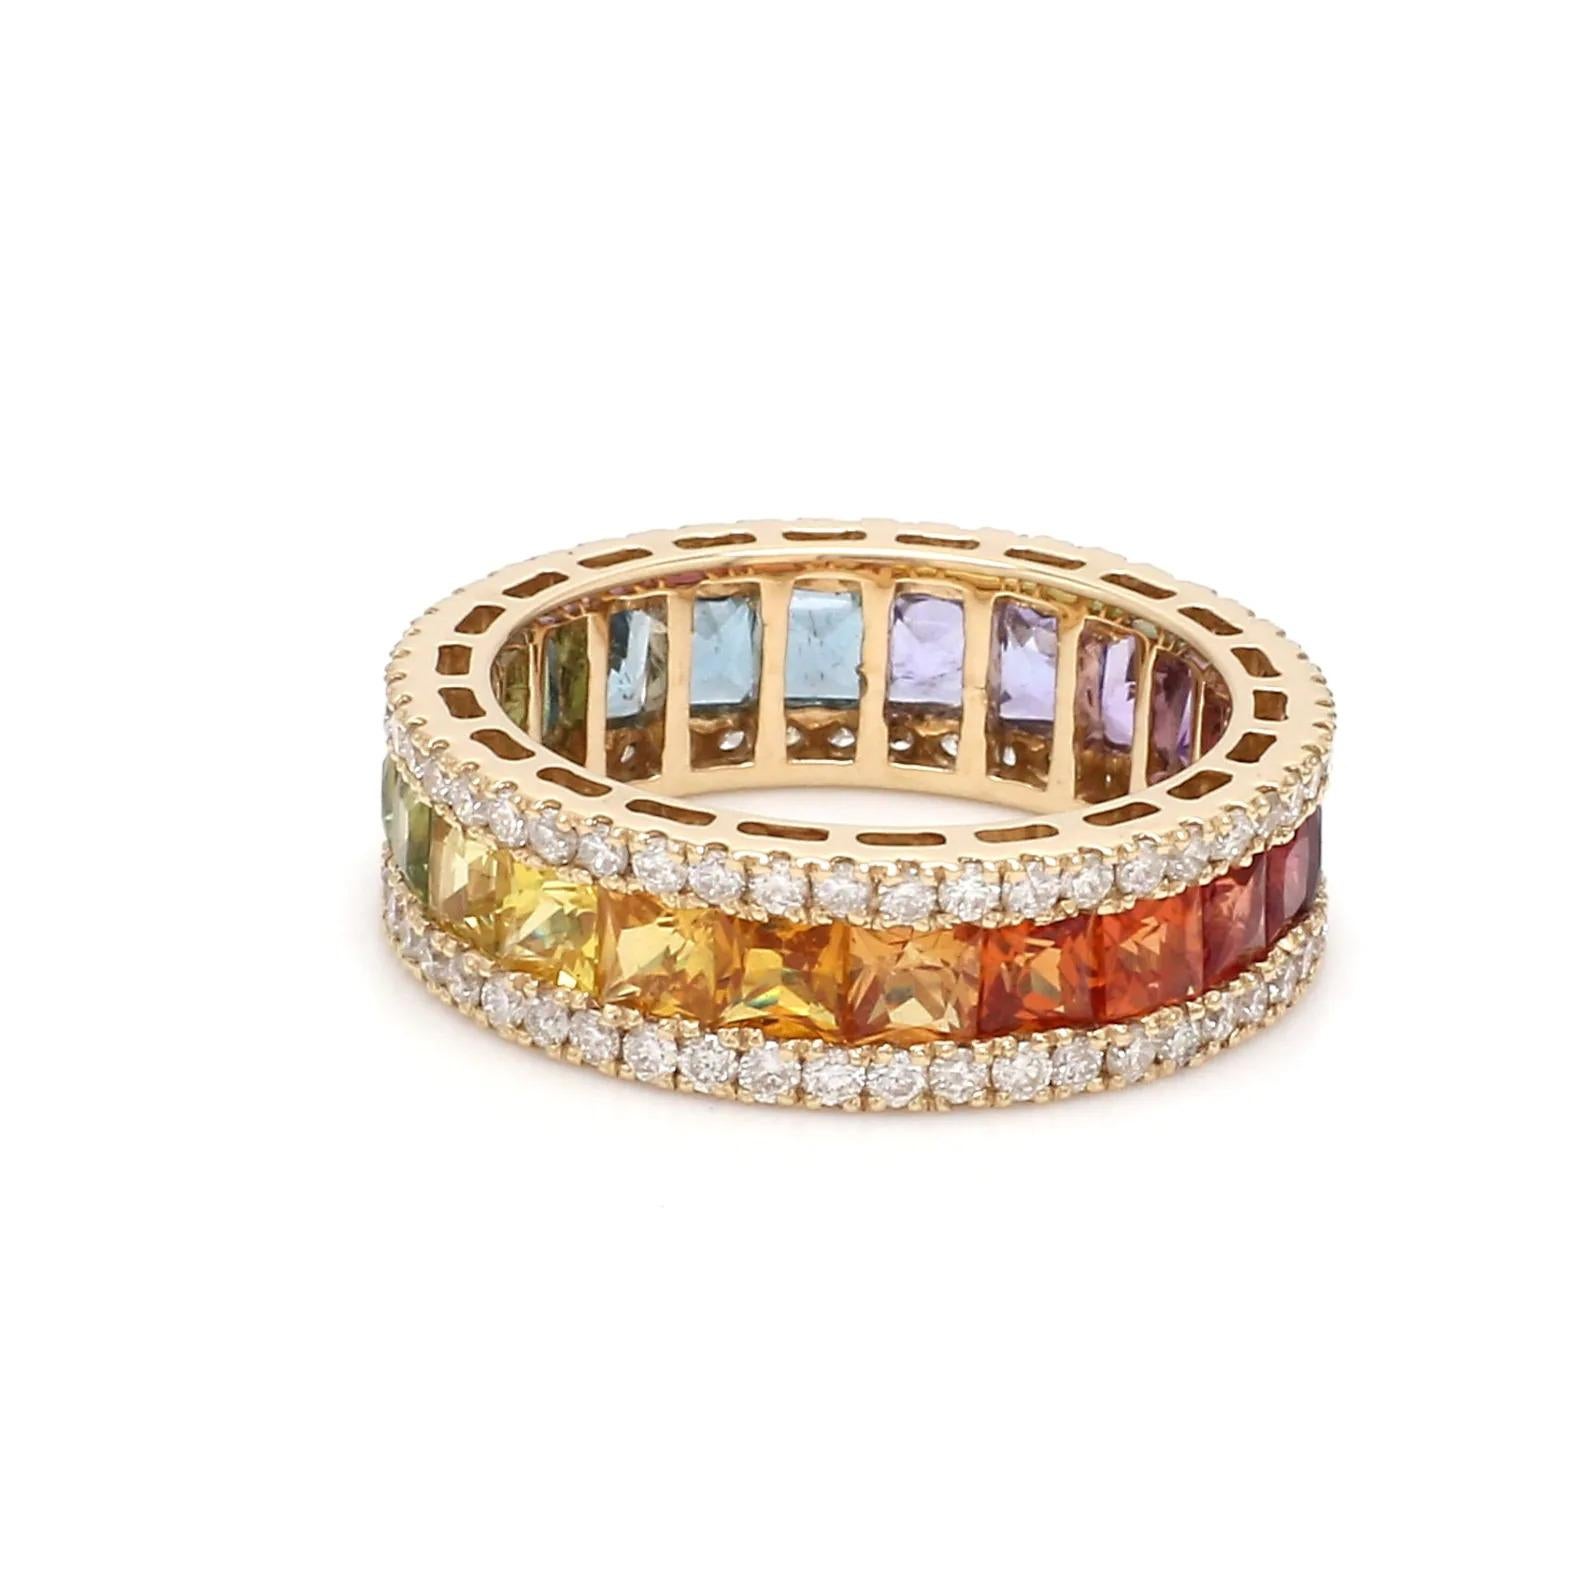 This ring has been meticulously crafted from 14-karat gold.  It is hand set with 3.5 carat multi sapphire, gemstones & 1.0 carats of sparkling diamonds. 

The ring is a size 7 and may be resized to larger or smaller upon request. 
FOLLOW  MEGHNA